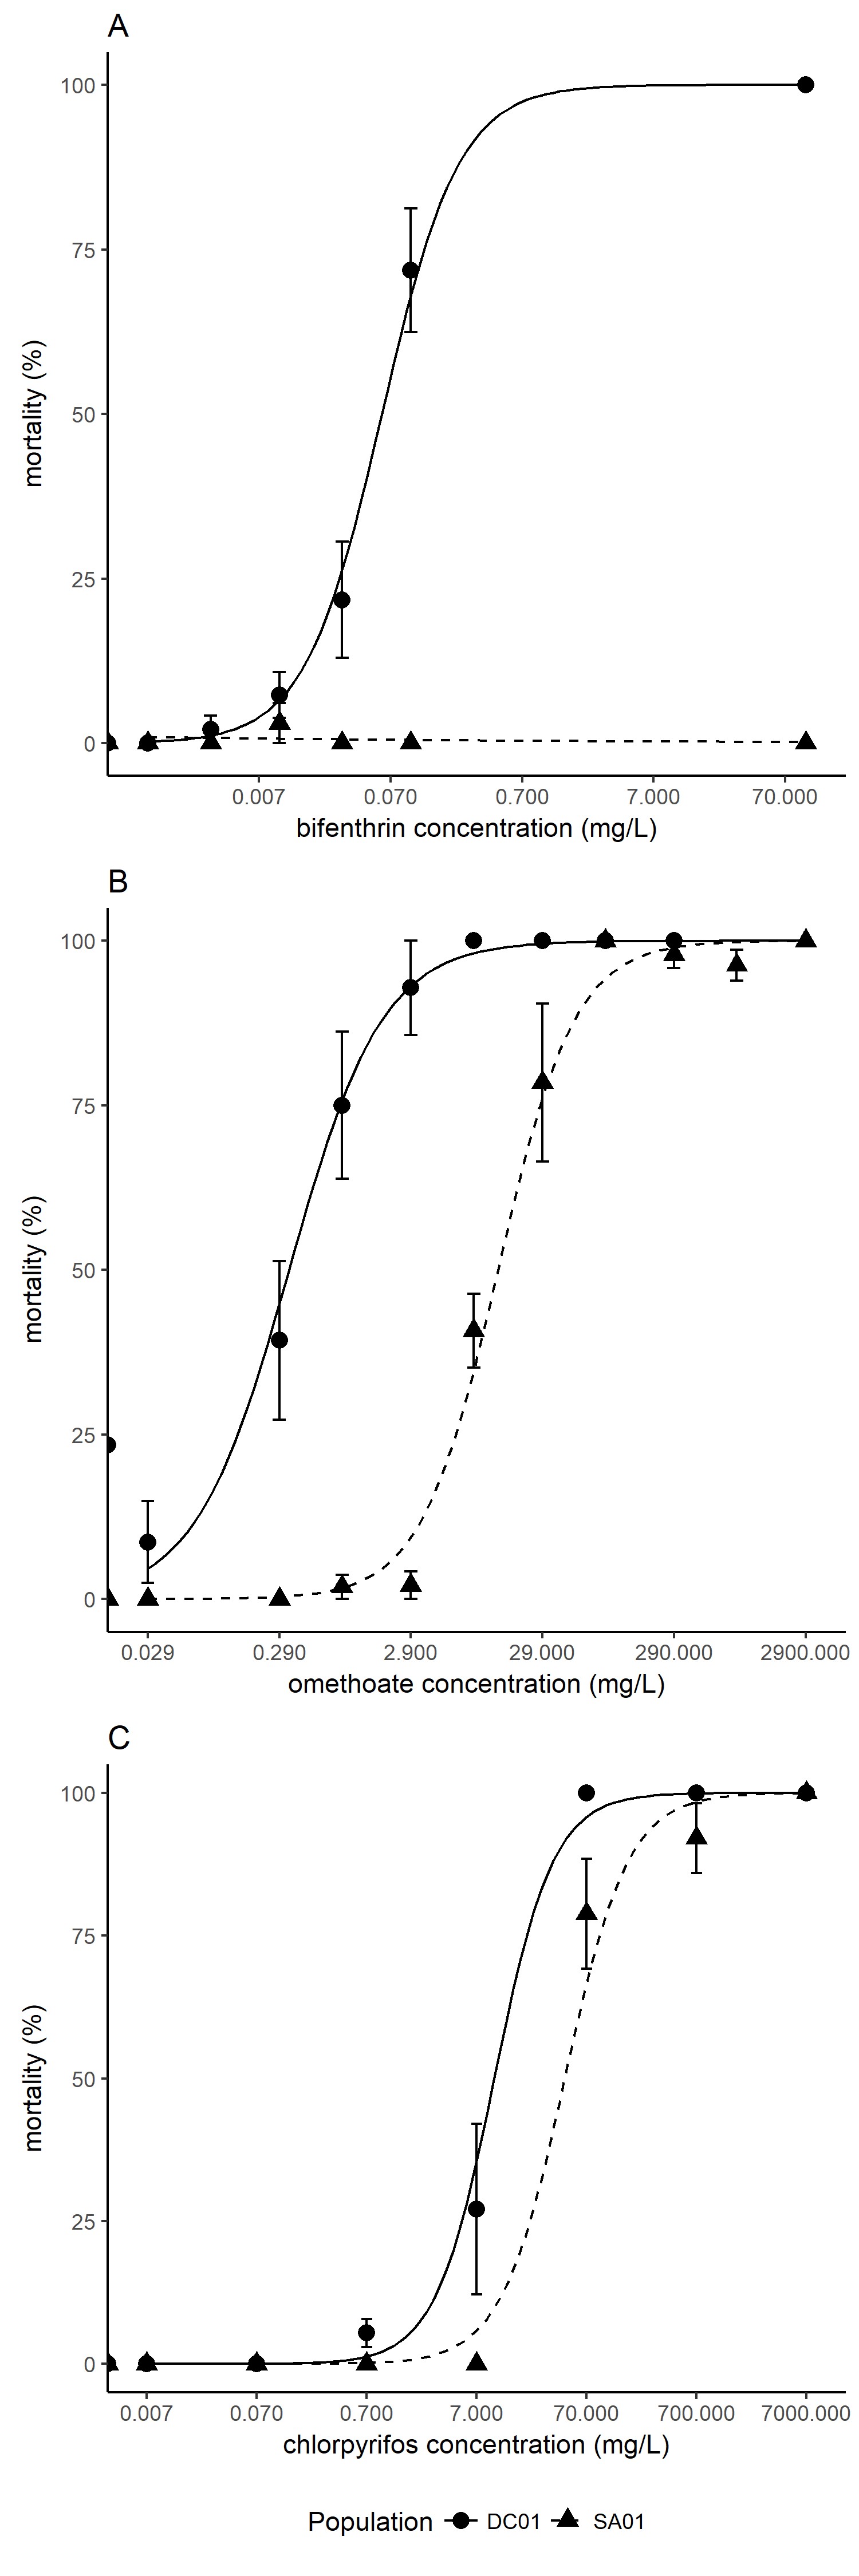 Figure 2. Concentration-mortality curves for redlegged earth mite from a susceptible (DC01) and resistant (SA01) populations when exposed to a synthetic pyrethroid — bifenthrin (A) — and an organophosphate — omethoate (B) — after 8 hrs exposure. Vertical bars denote standard errors. Lines represent fitted values from fitted logistic regression models.